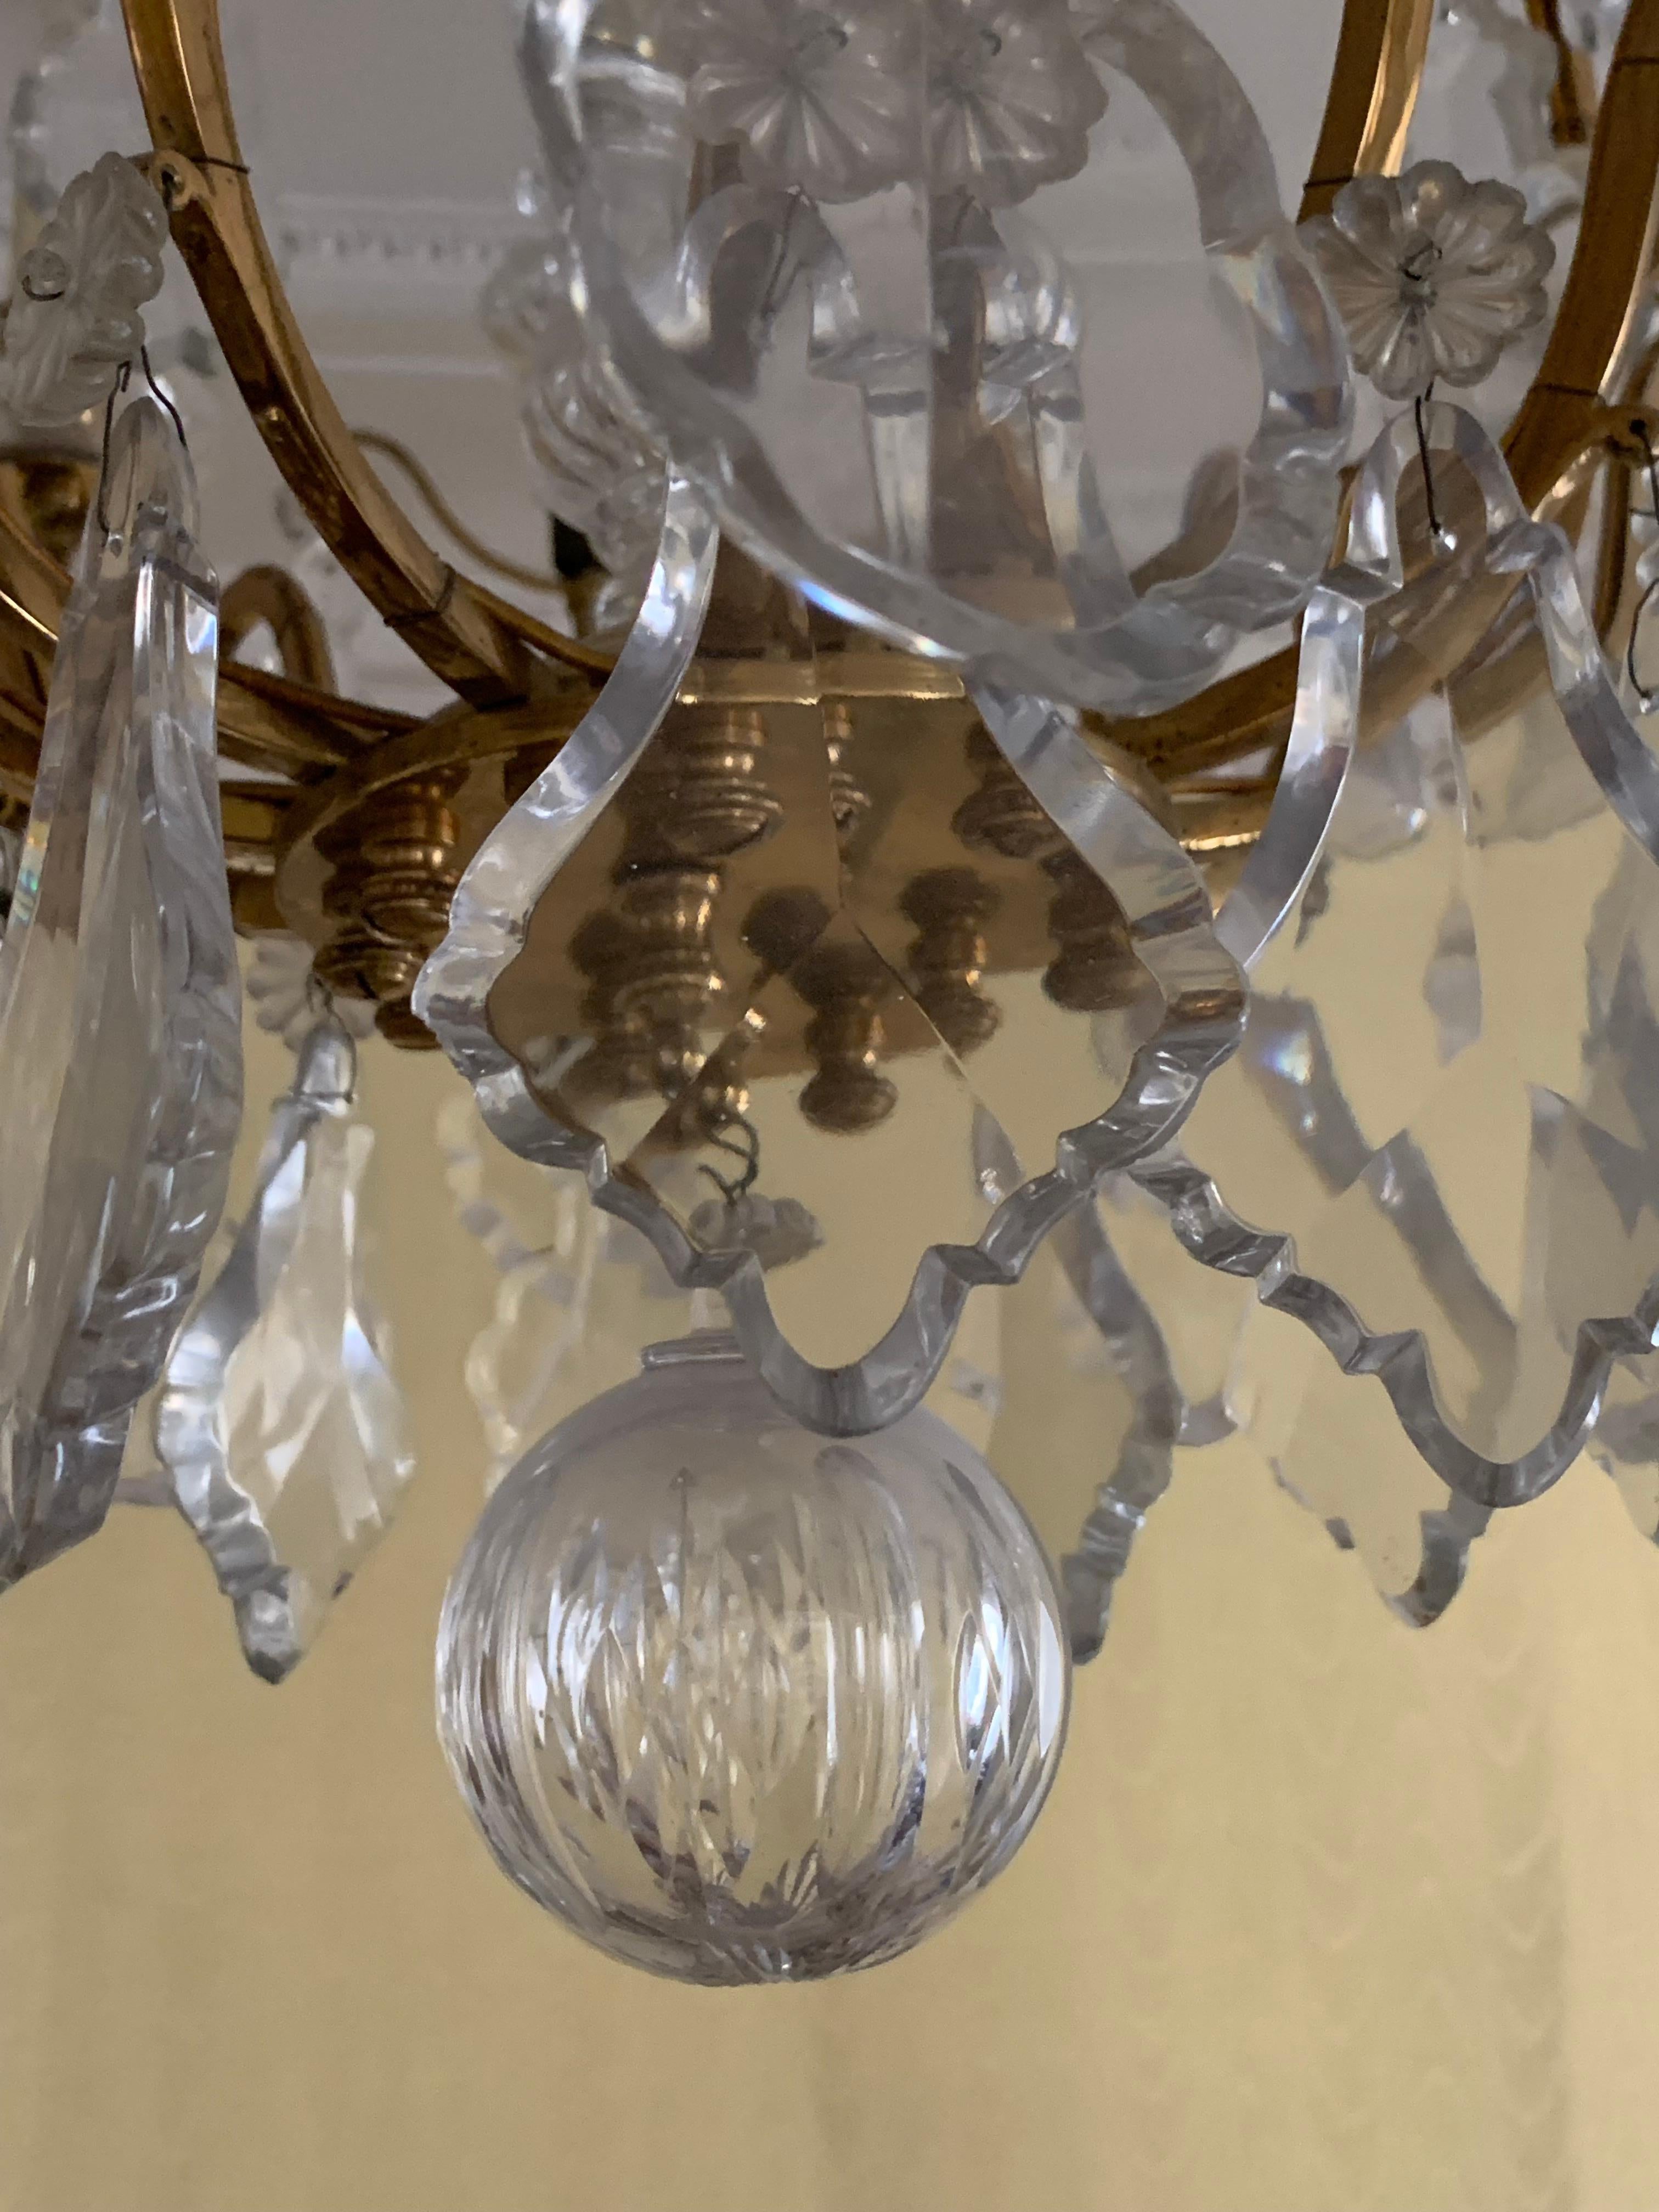 Pair of chandelier in crystal and bronze 12 lights, six all around, 3  inside on the top ,3 inside bottom, look the video its much better
this pair of chandelier are very elegant and can go in all interior,modern ,classic 
probably by baccarat due